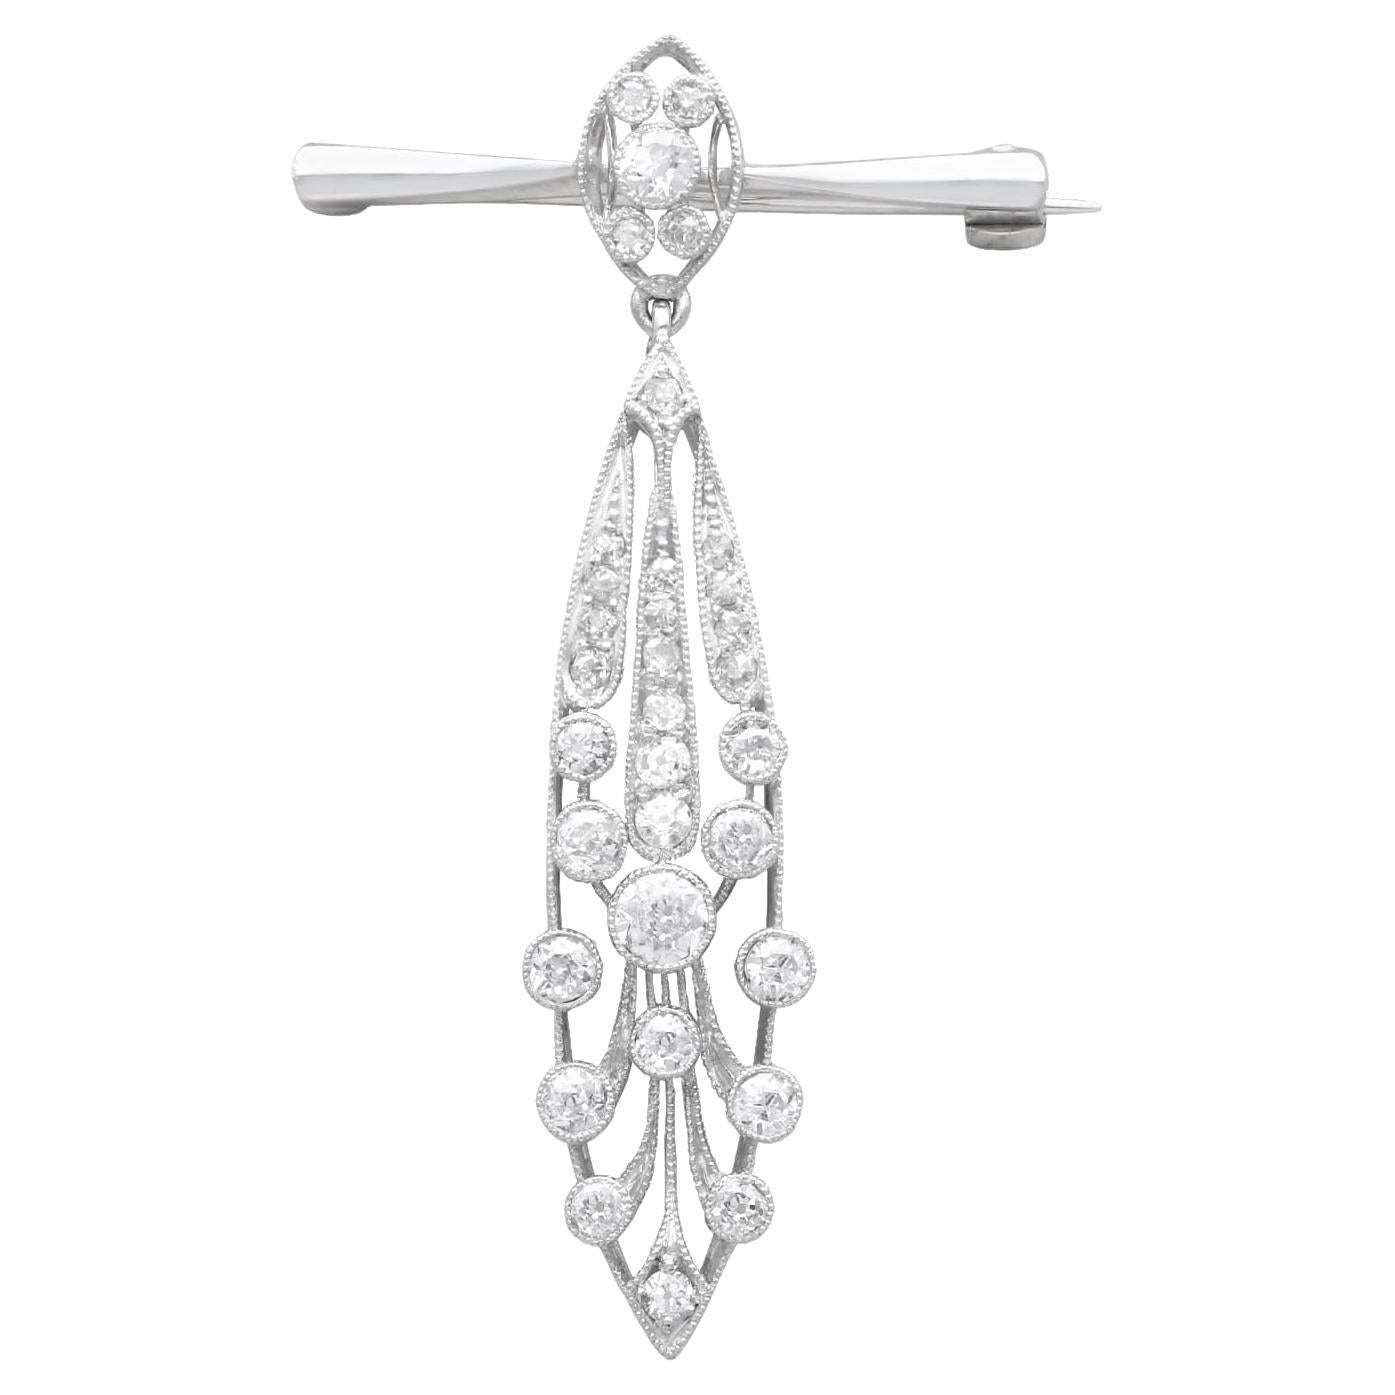 Antique 1.38Ct Diamond Platinum and 15k White Gold Drop Brooch Circa 1925 For Sale